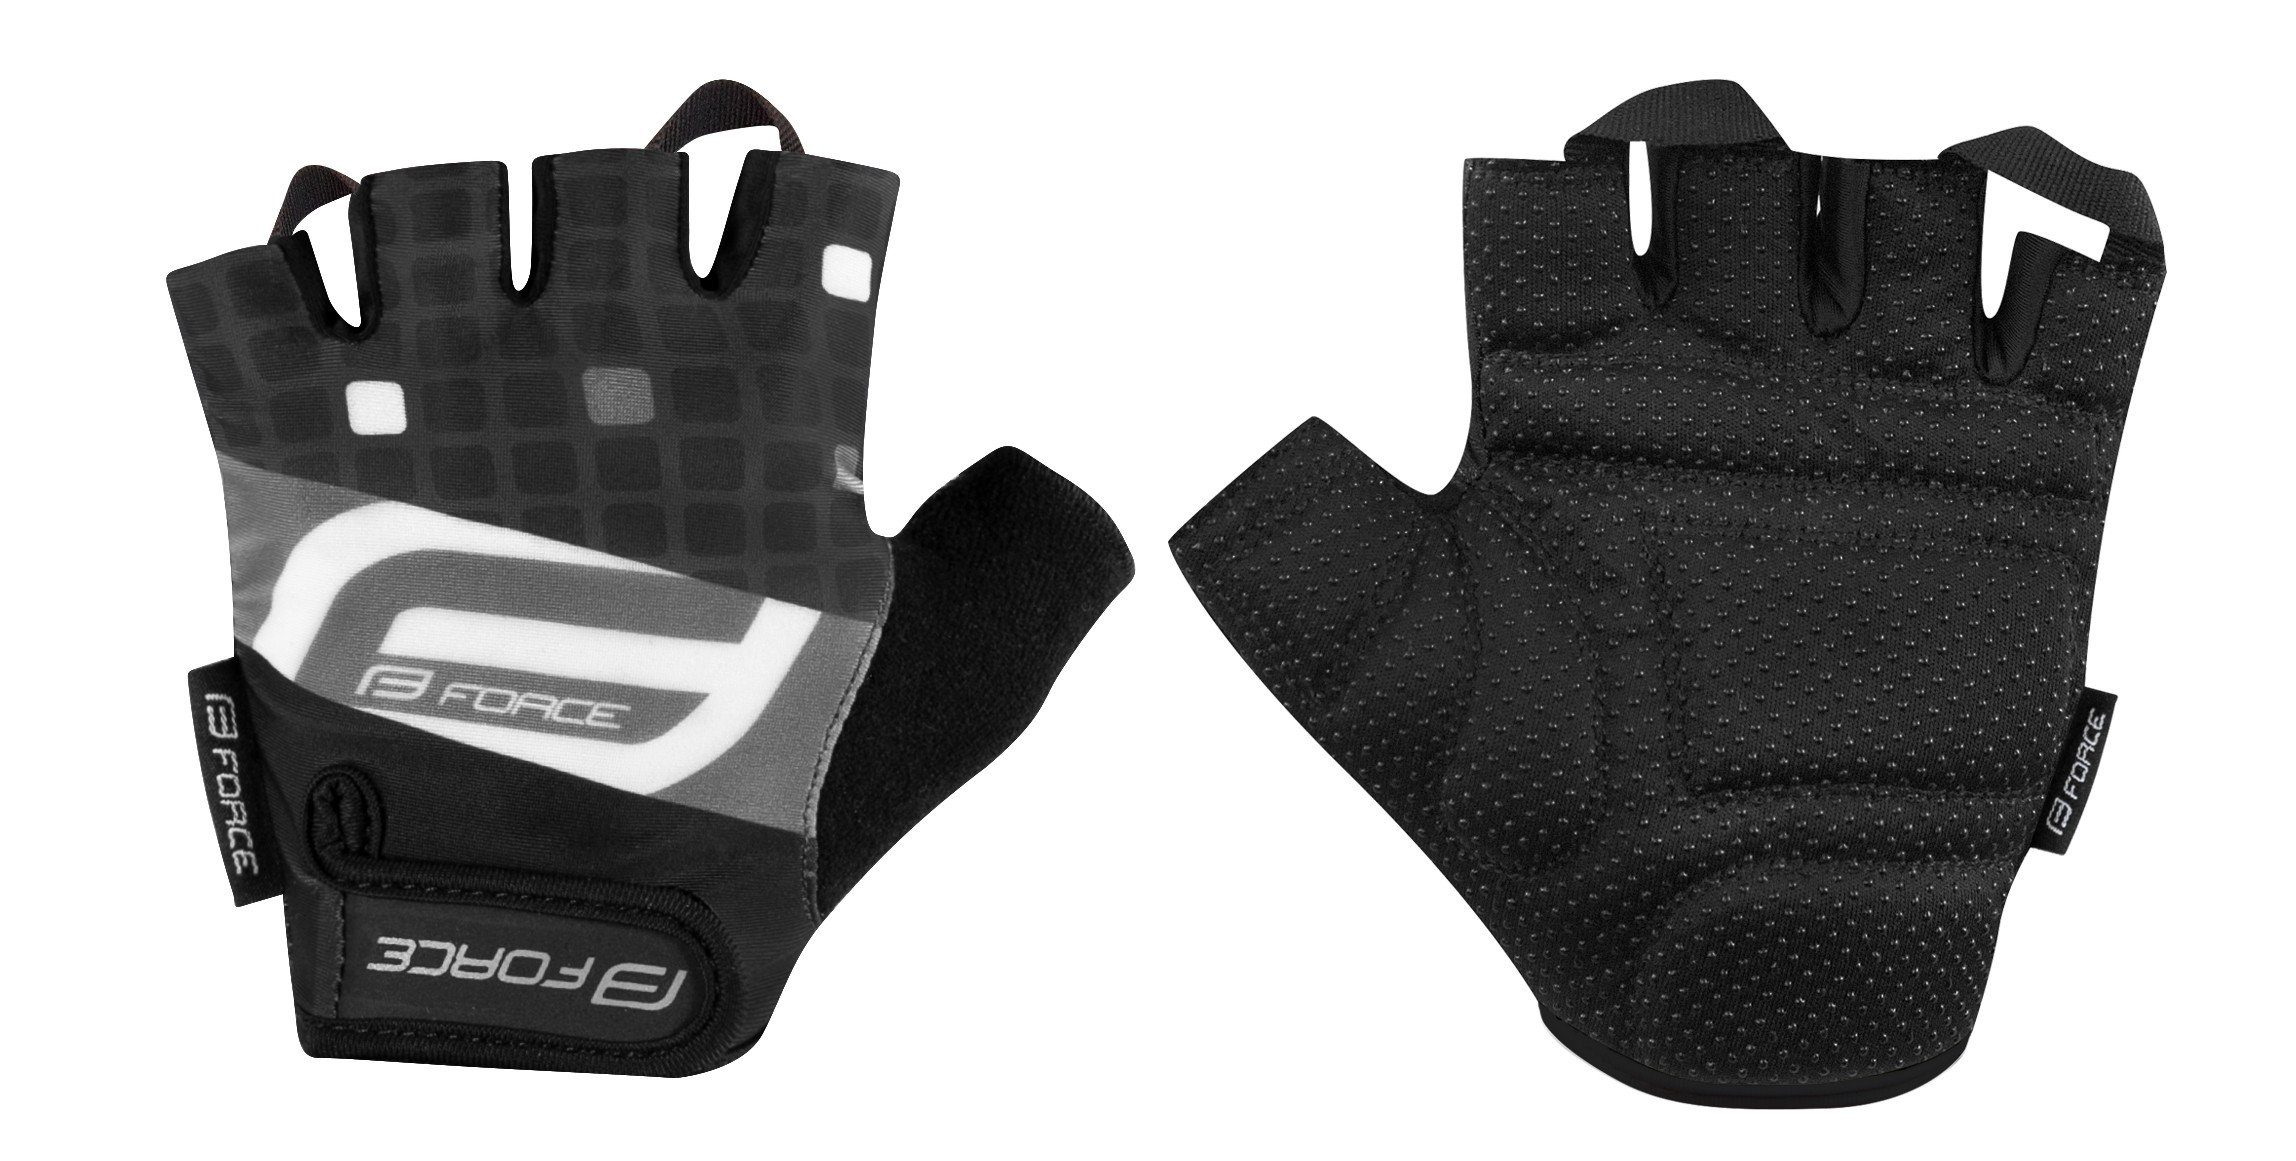 FORCE SQUARE Fahrradhandschuhe Handschuhe FORCE